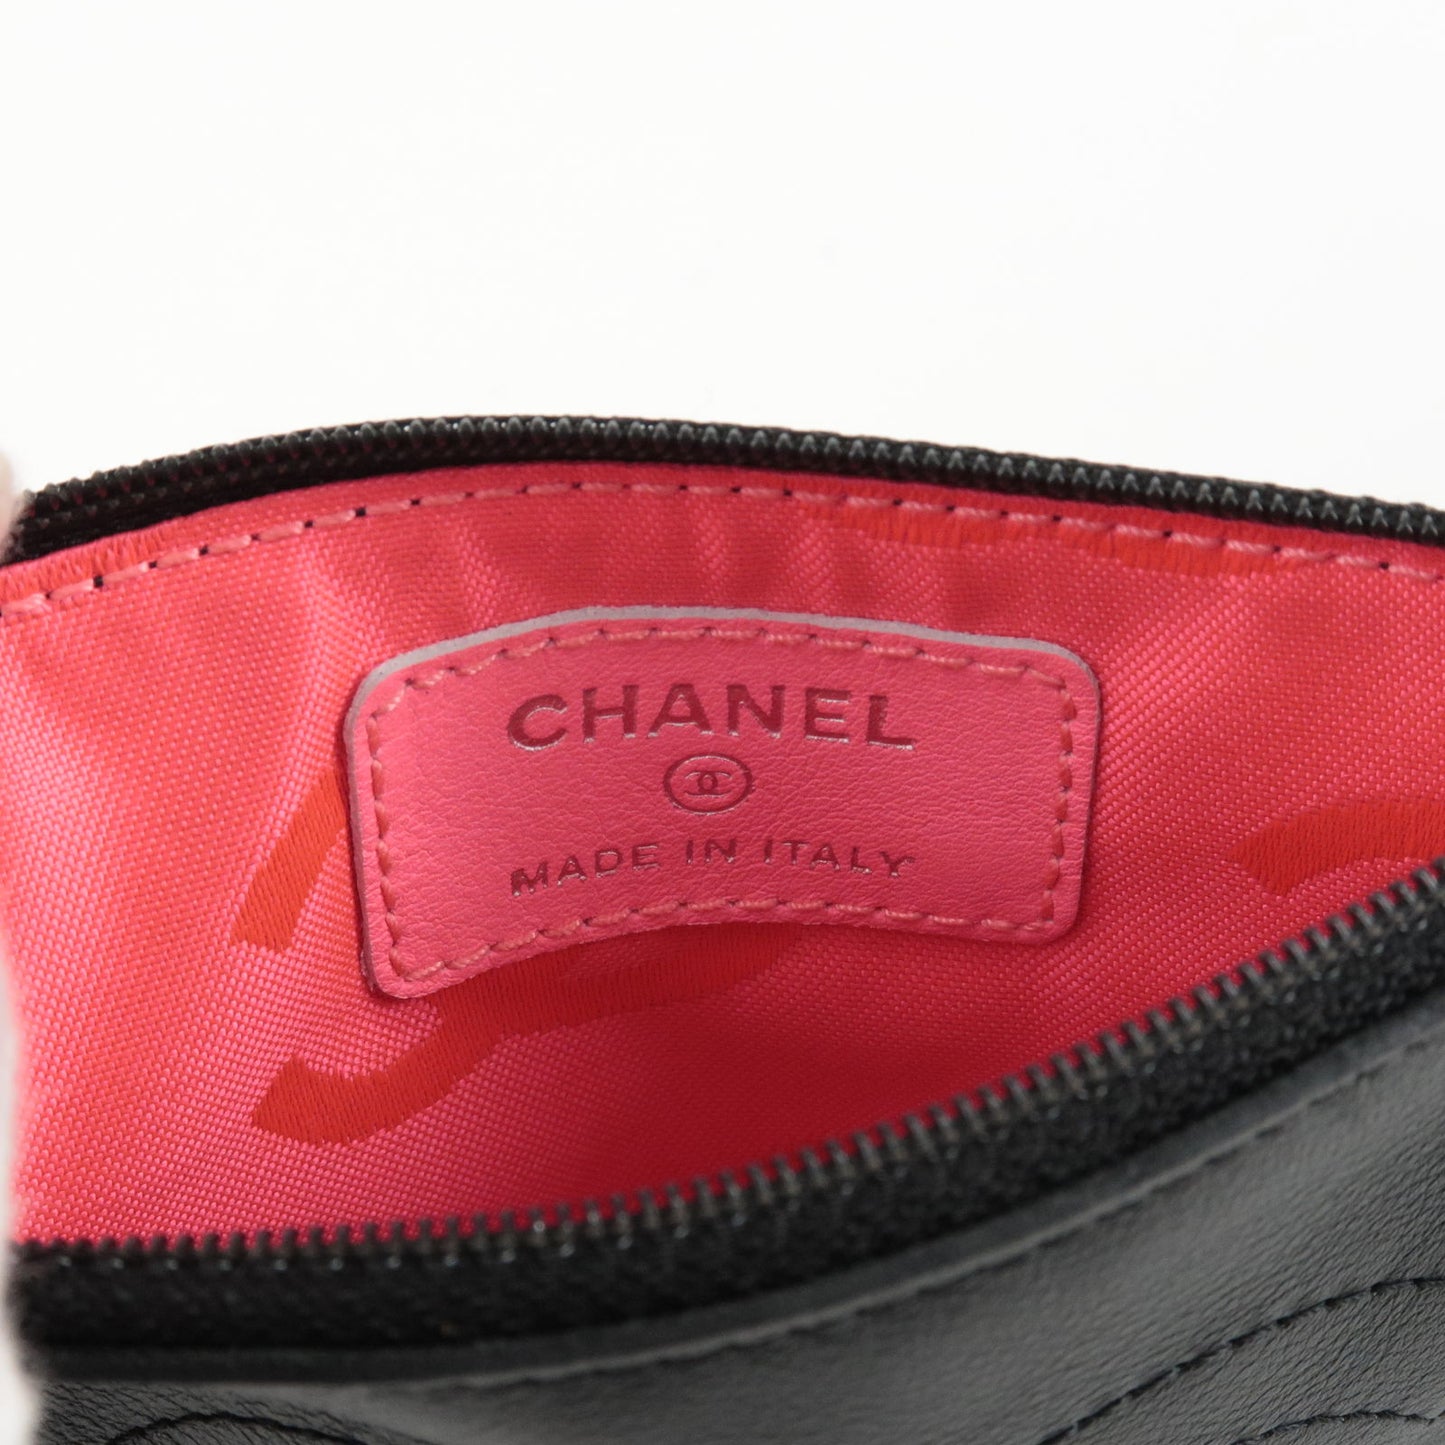 CHANEL Coco Mark Leather Cosmetic Small Pouch Black